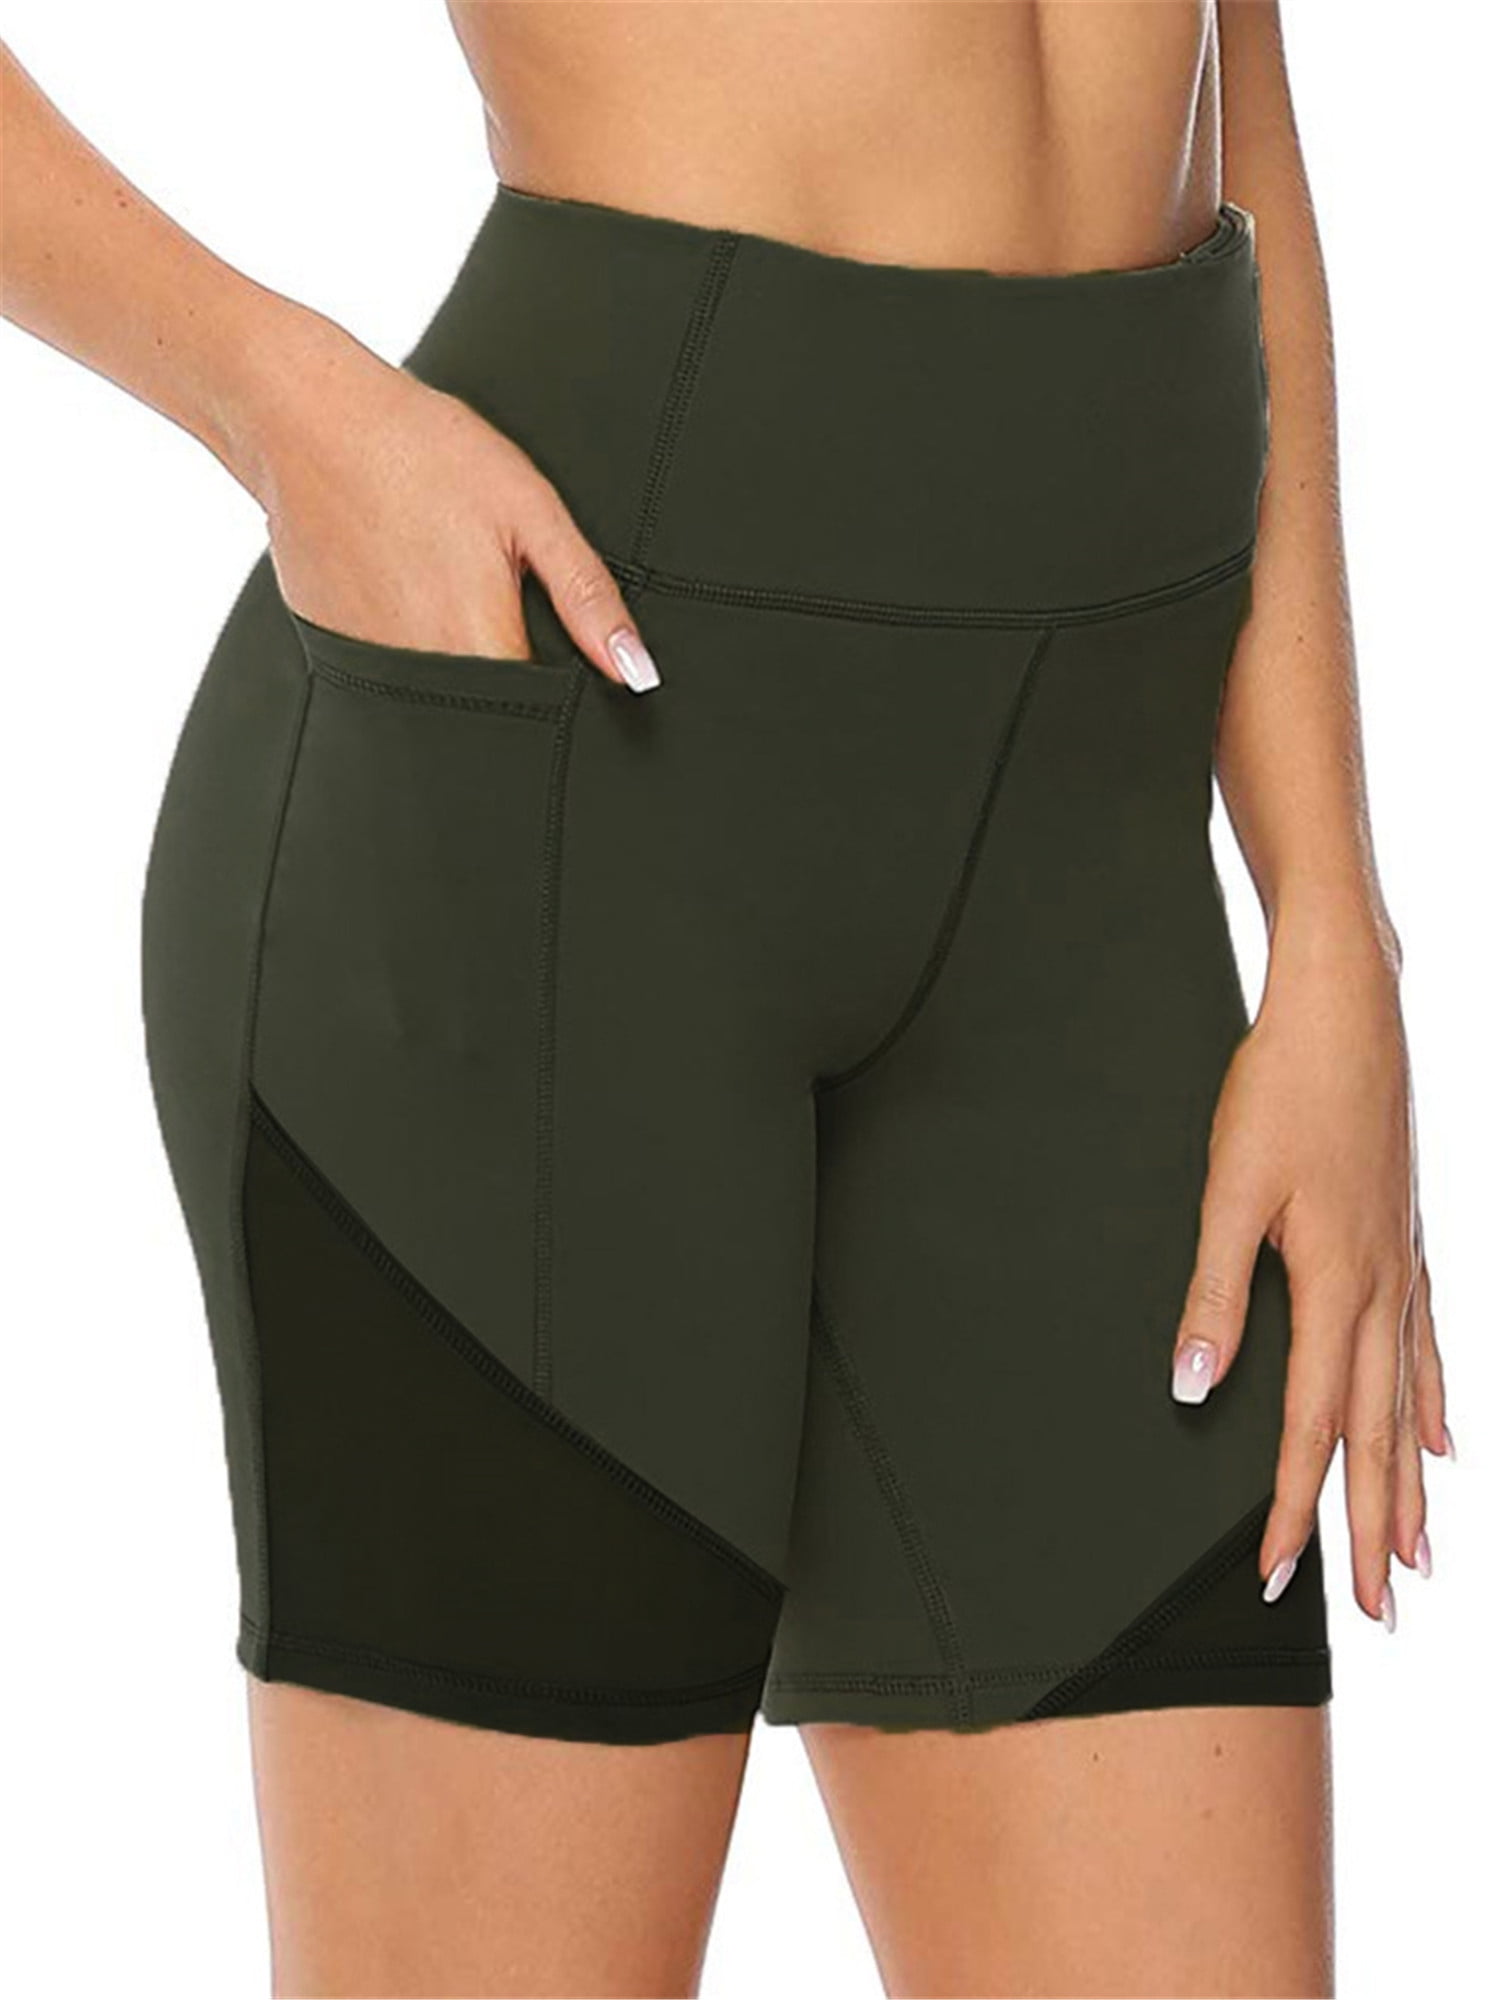 aunavey-aunavey-high-waist-yoga-shorts-for-women-with-2-side-pockets